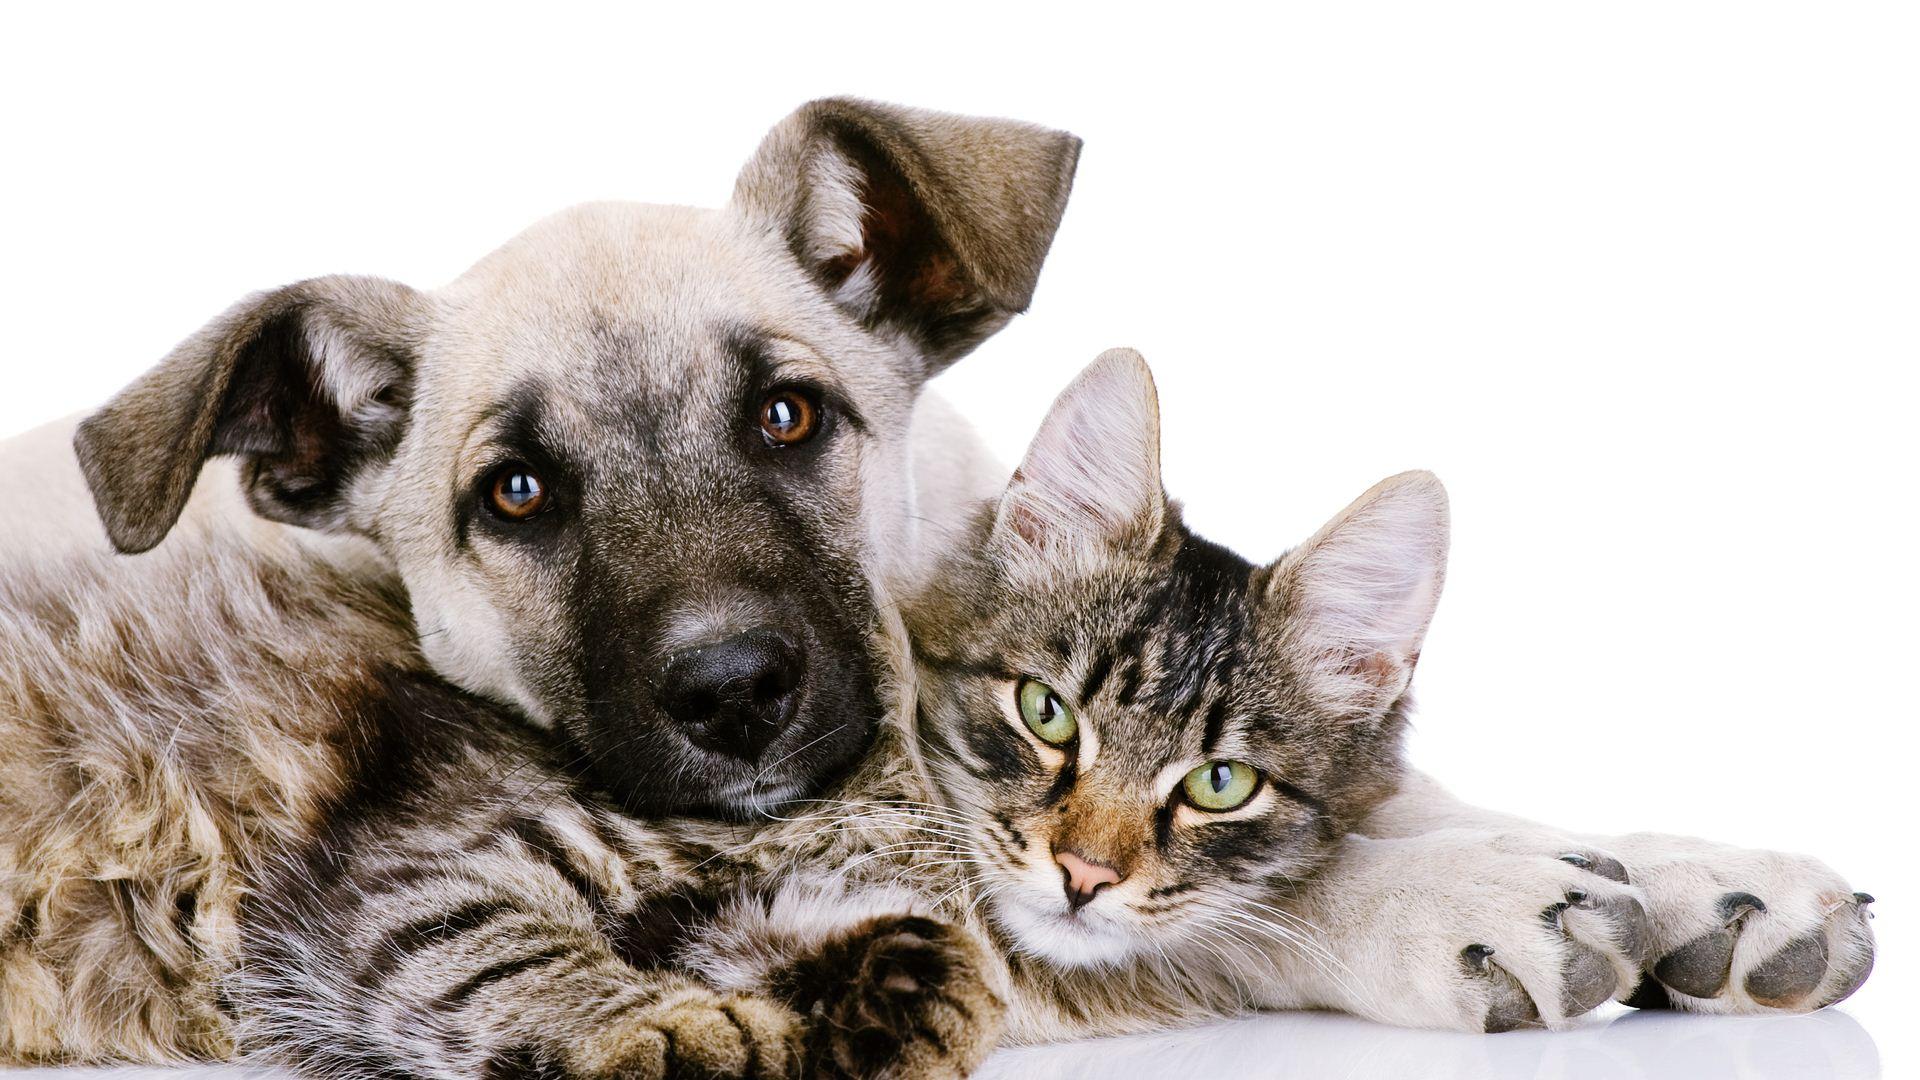 Free download Cat And Dog Wallpaper High Quality Download